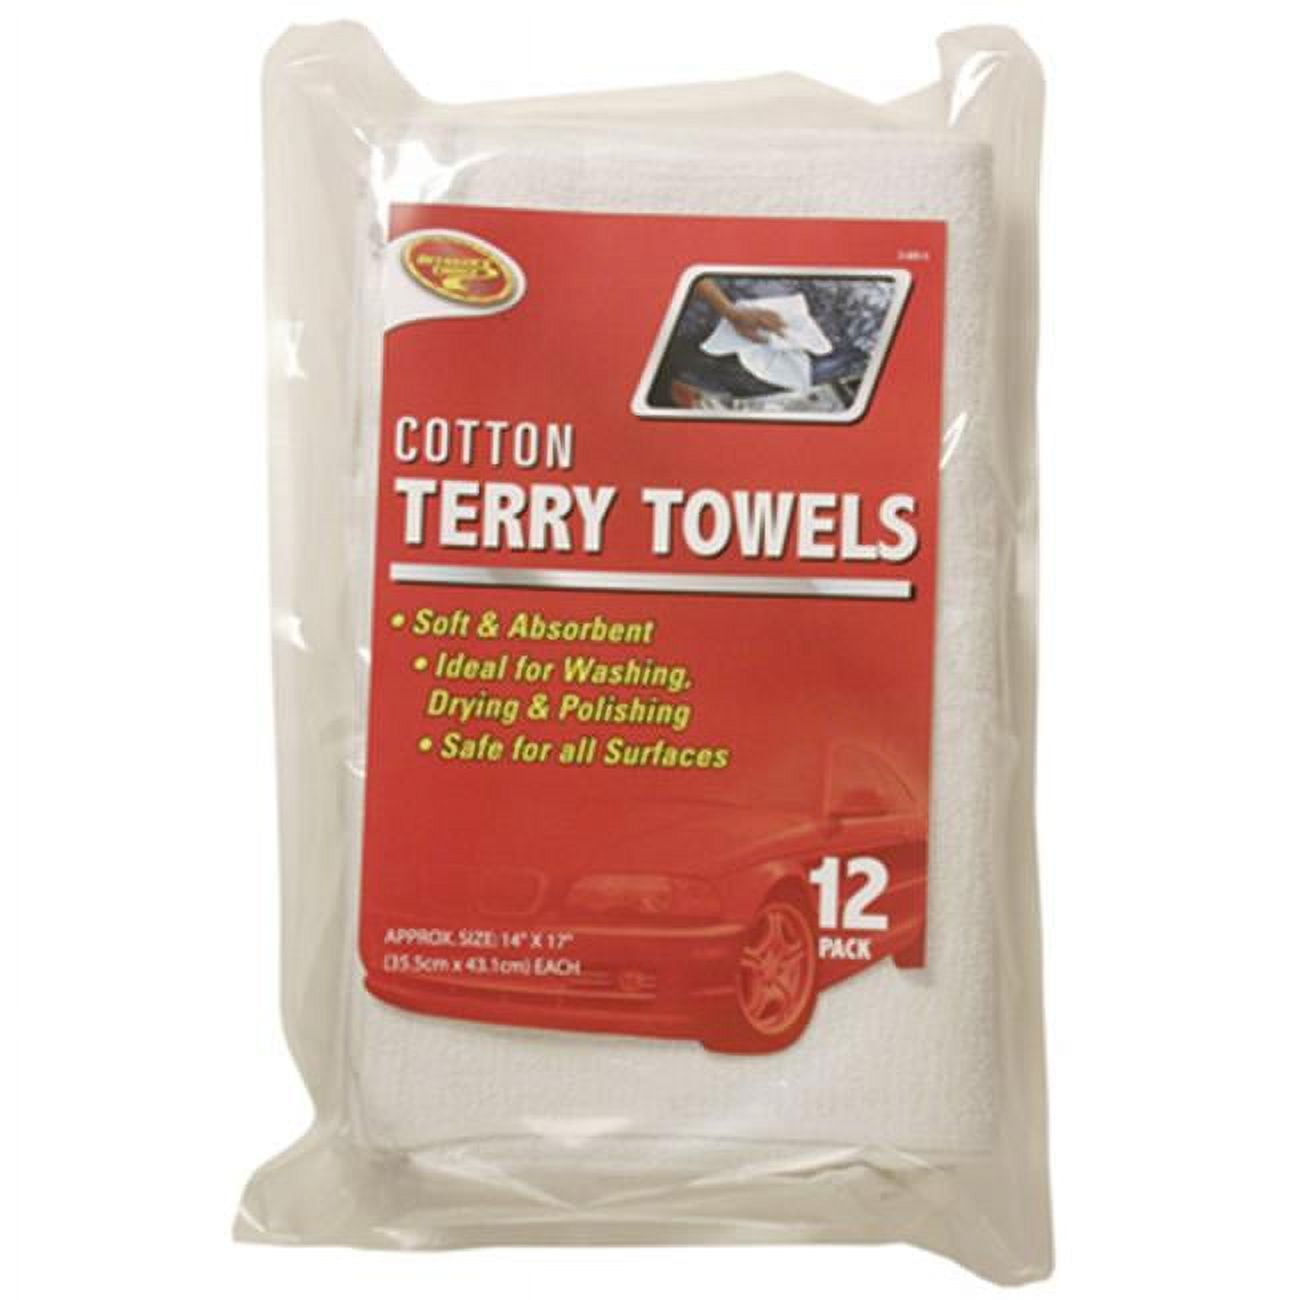 Pennzoil Waffle Towel: Ultimate Car Drying Towel - High Absorbency